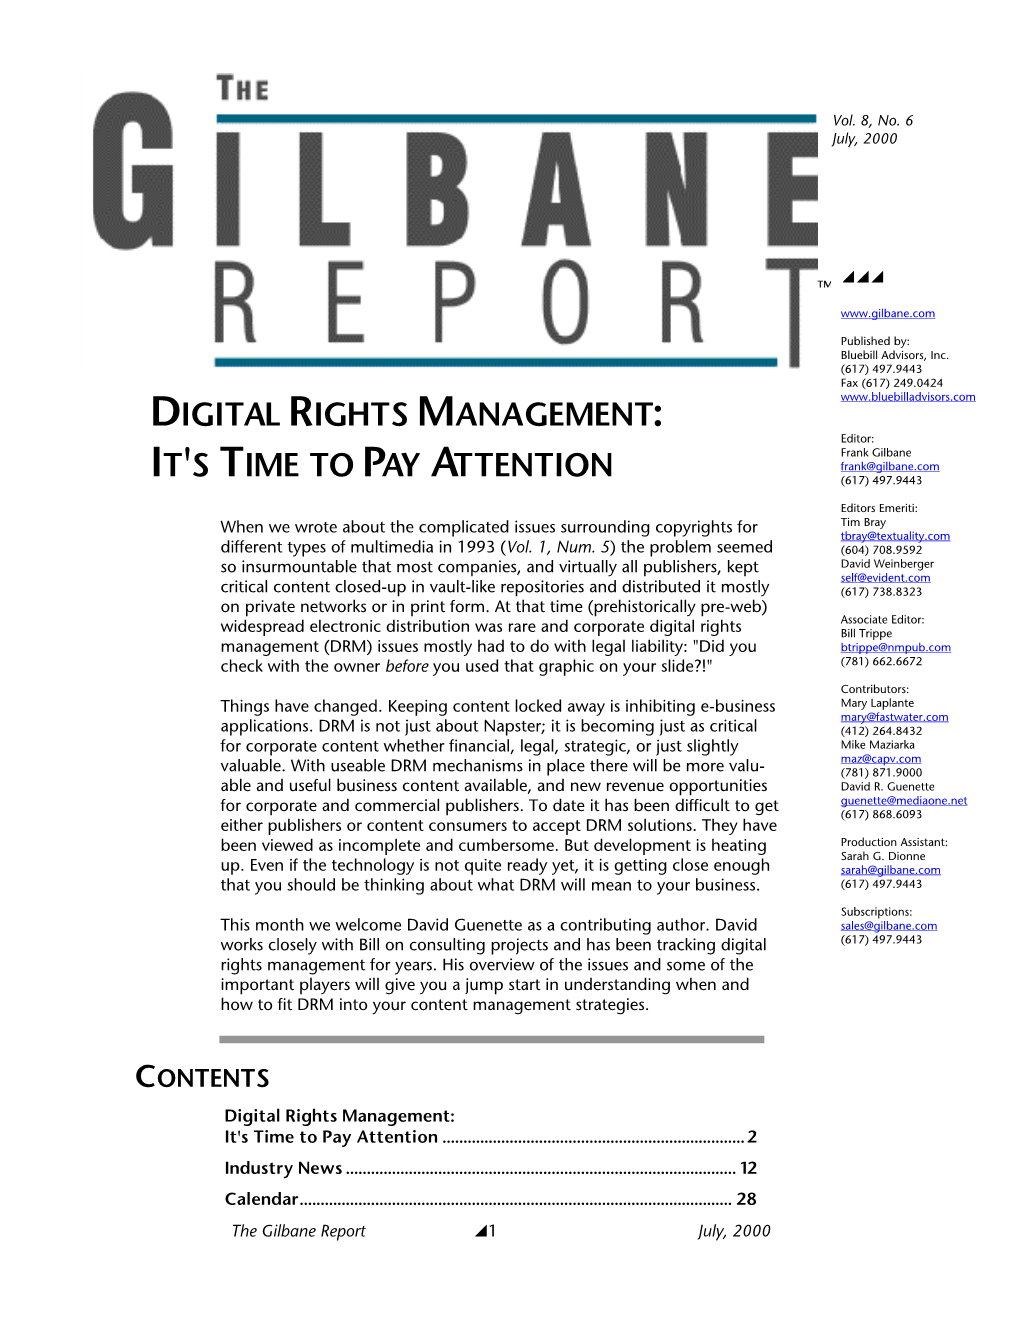 DIGITAL RIGHTS MANAGEMENT: Editor: Frank Gilbane Frank@Gilbane.Com IT's TIME to PAY ATTENTION (617) 497.9443